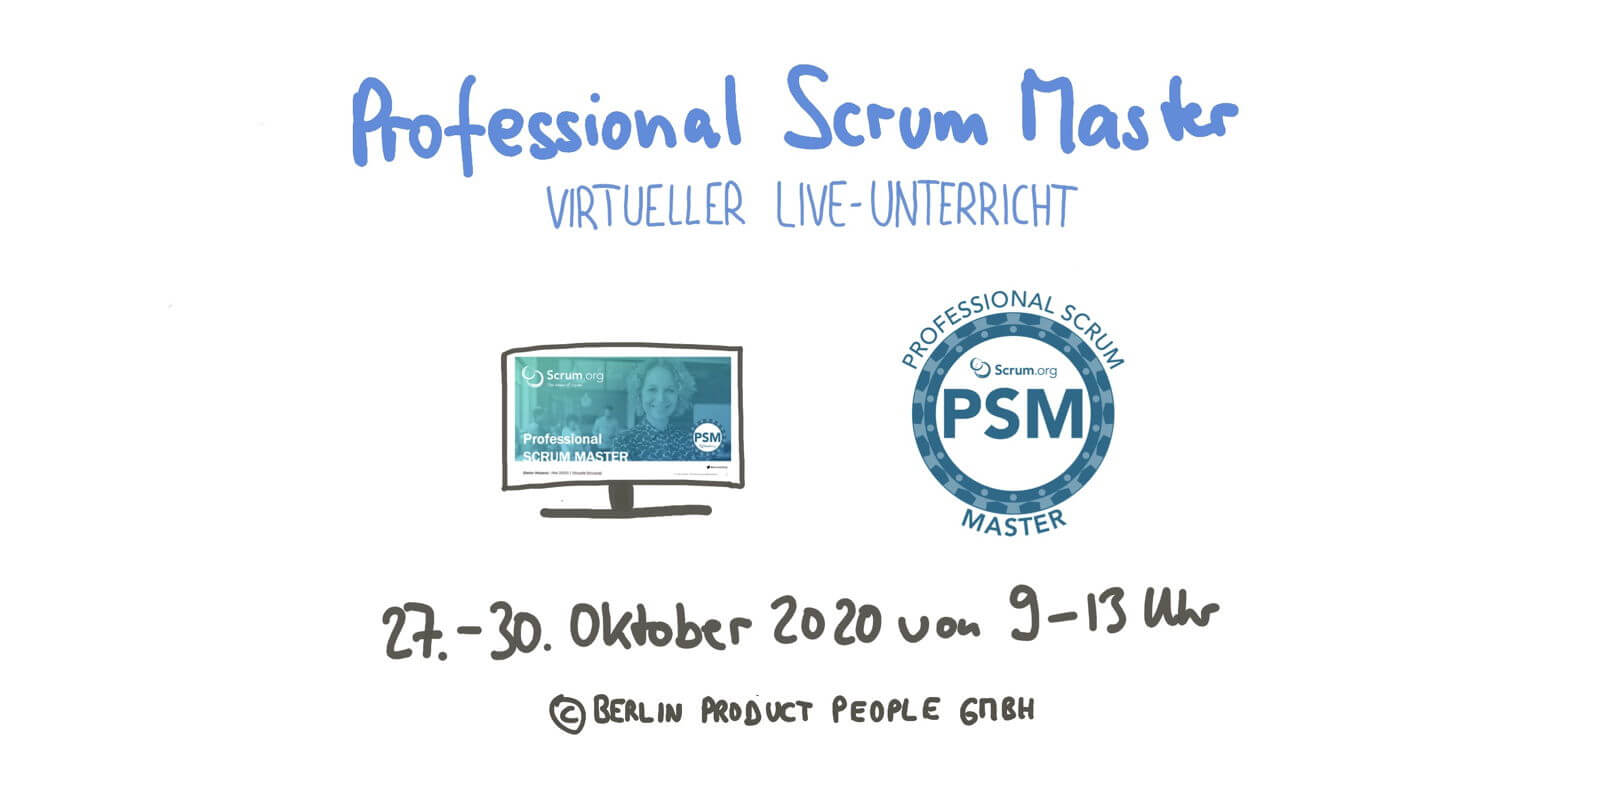 📅 🖥 Professional Scrum Master Training PSM I — Online: October 27-30, 2020 — Berlin Product People GmbH